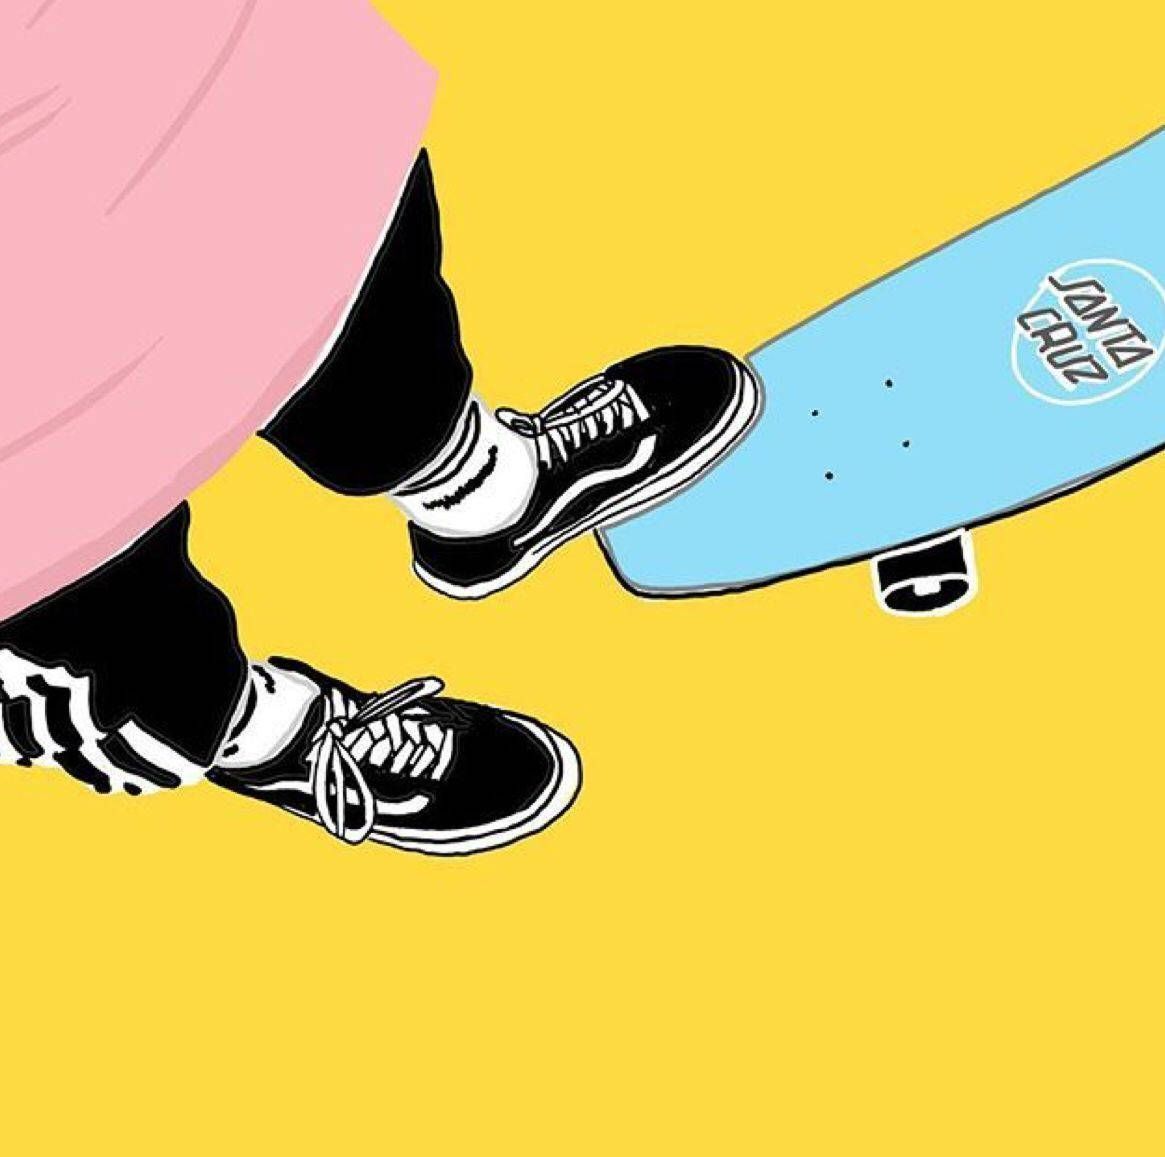 A pair of feet with a pink sock and black shoe is standing on a blue skateboard. - Skate, skater